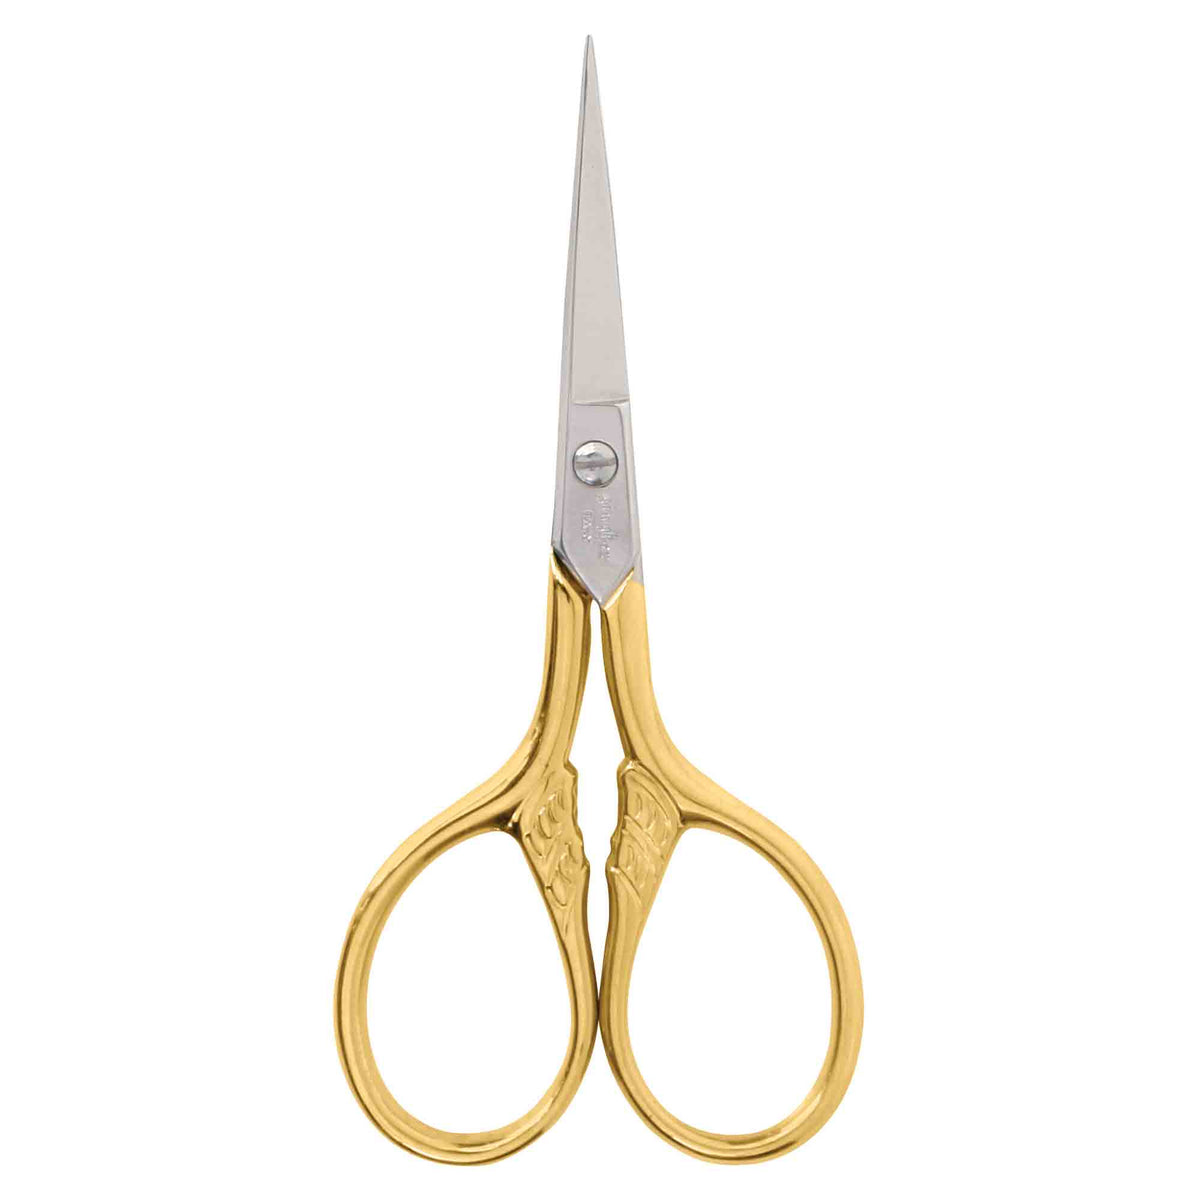 3-1/2 Curved Blade Embroidery Scissors For Detailed Trimming - Italy